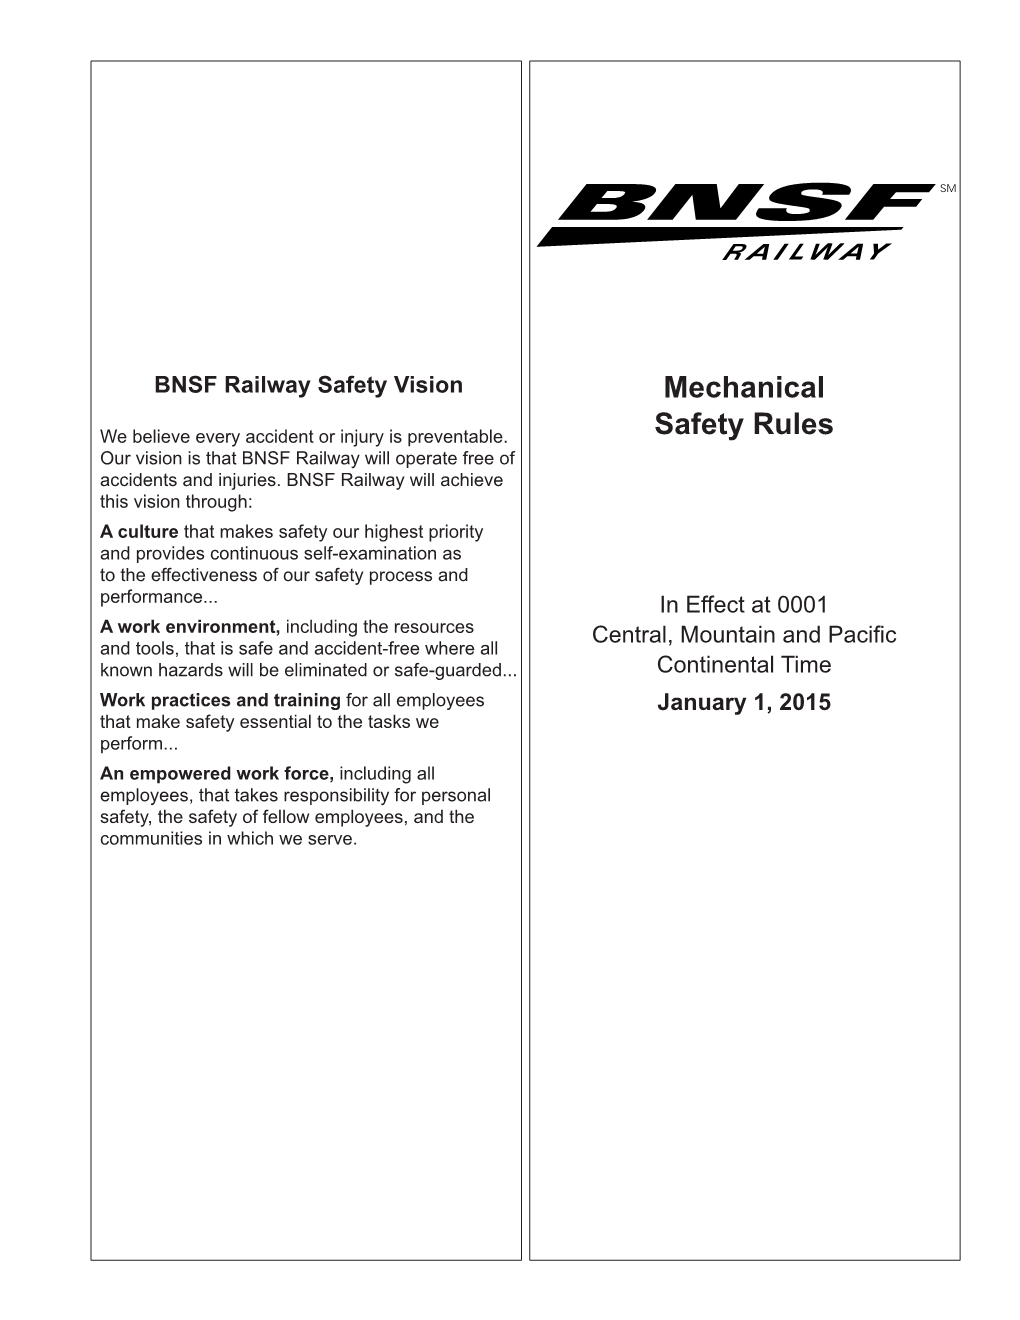 Mechanical Safety Rules—January 1, 2015